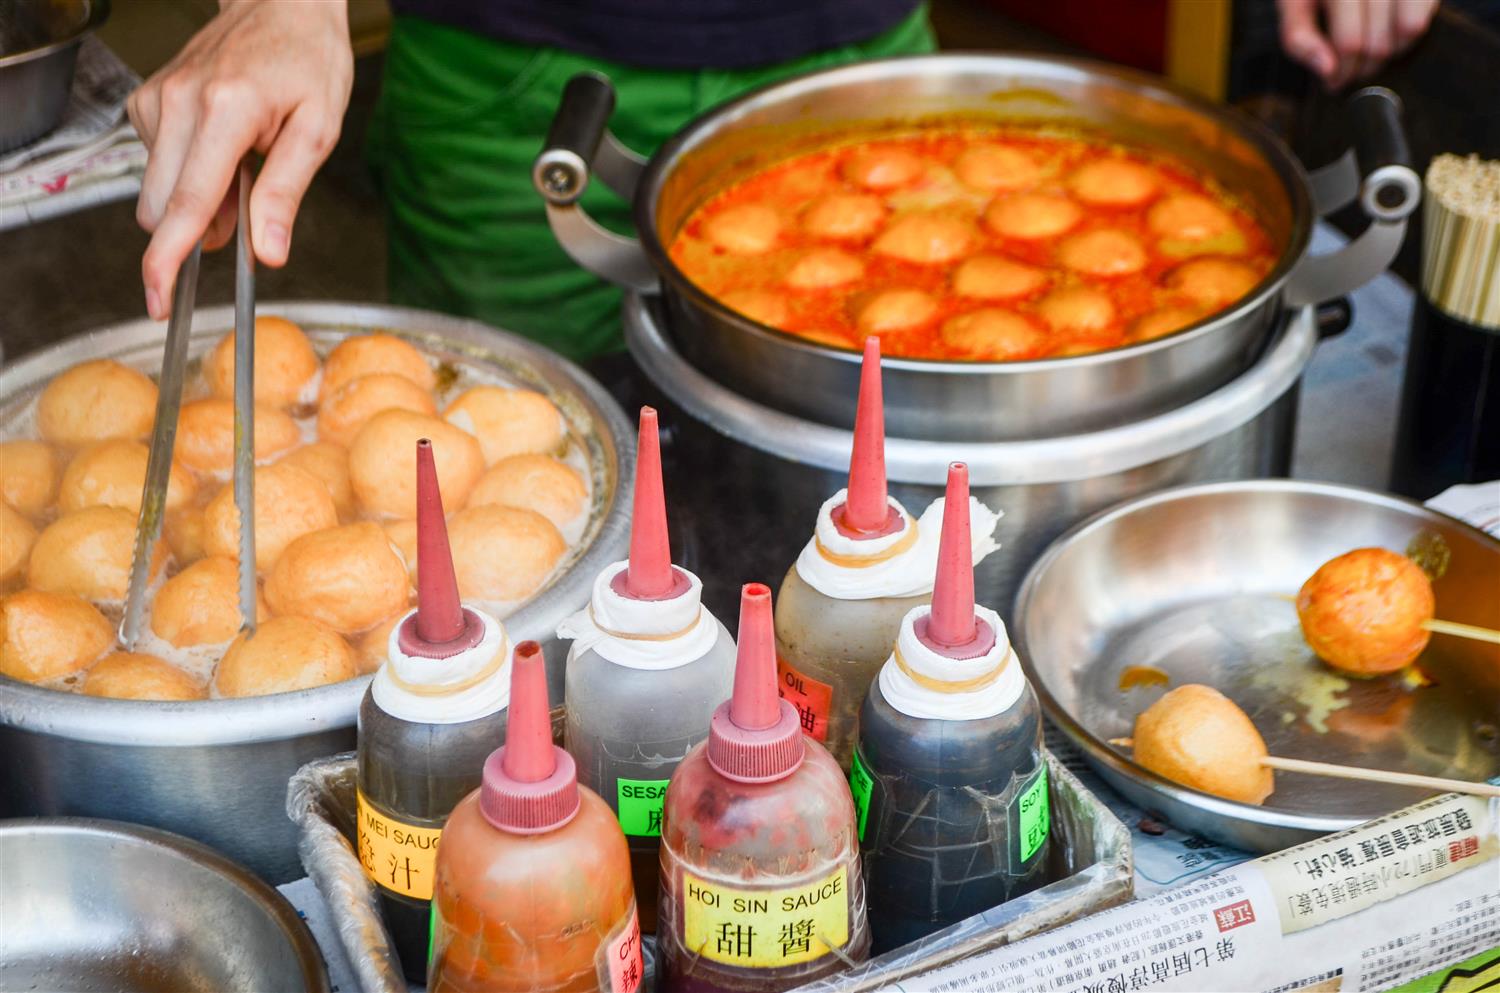 Giant curry fish balls